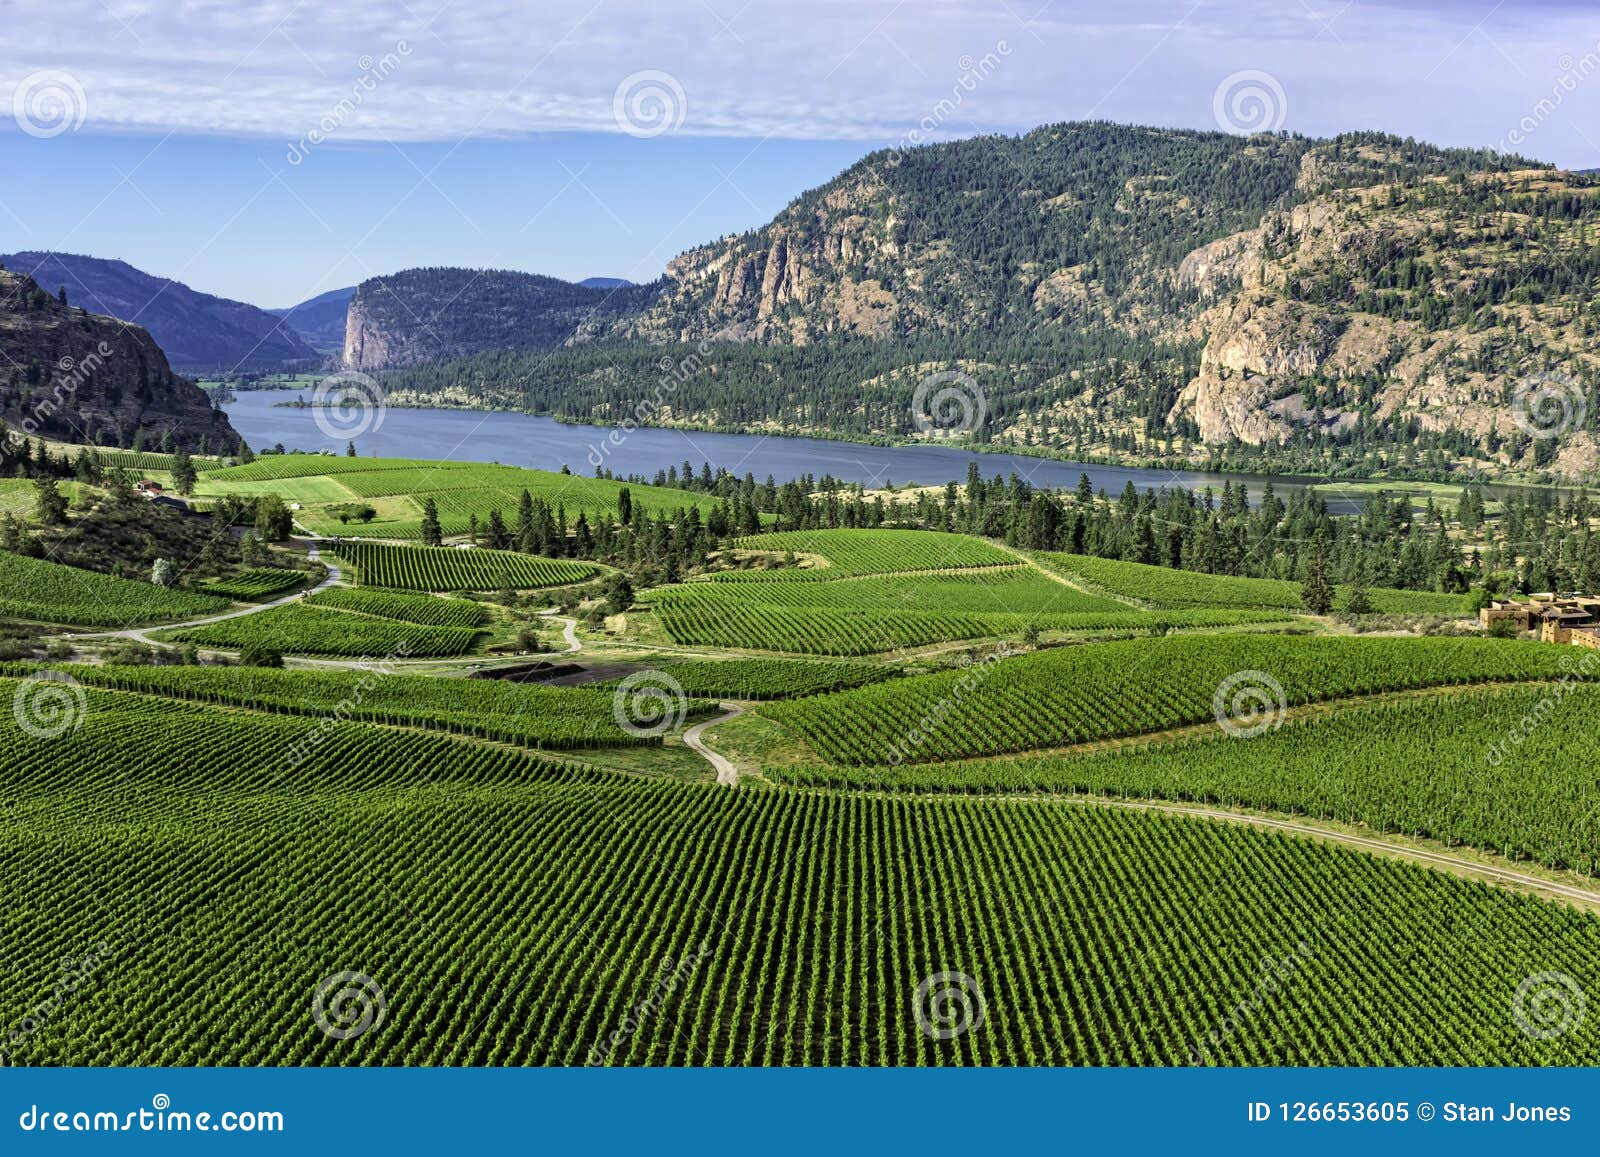 vineyards in the south okanagan near pentiction british columbia canada with vaseux lake in the background